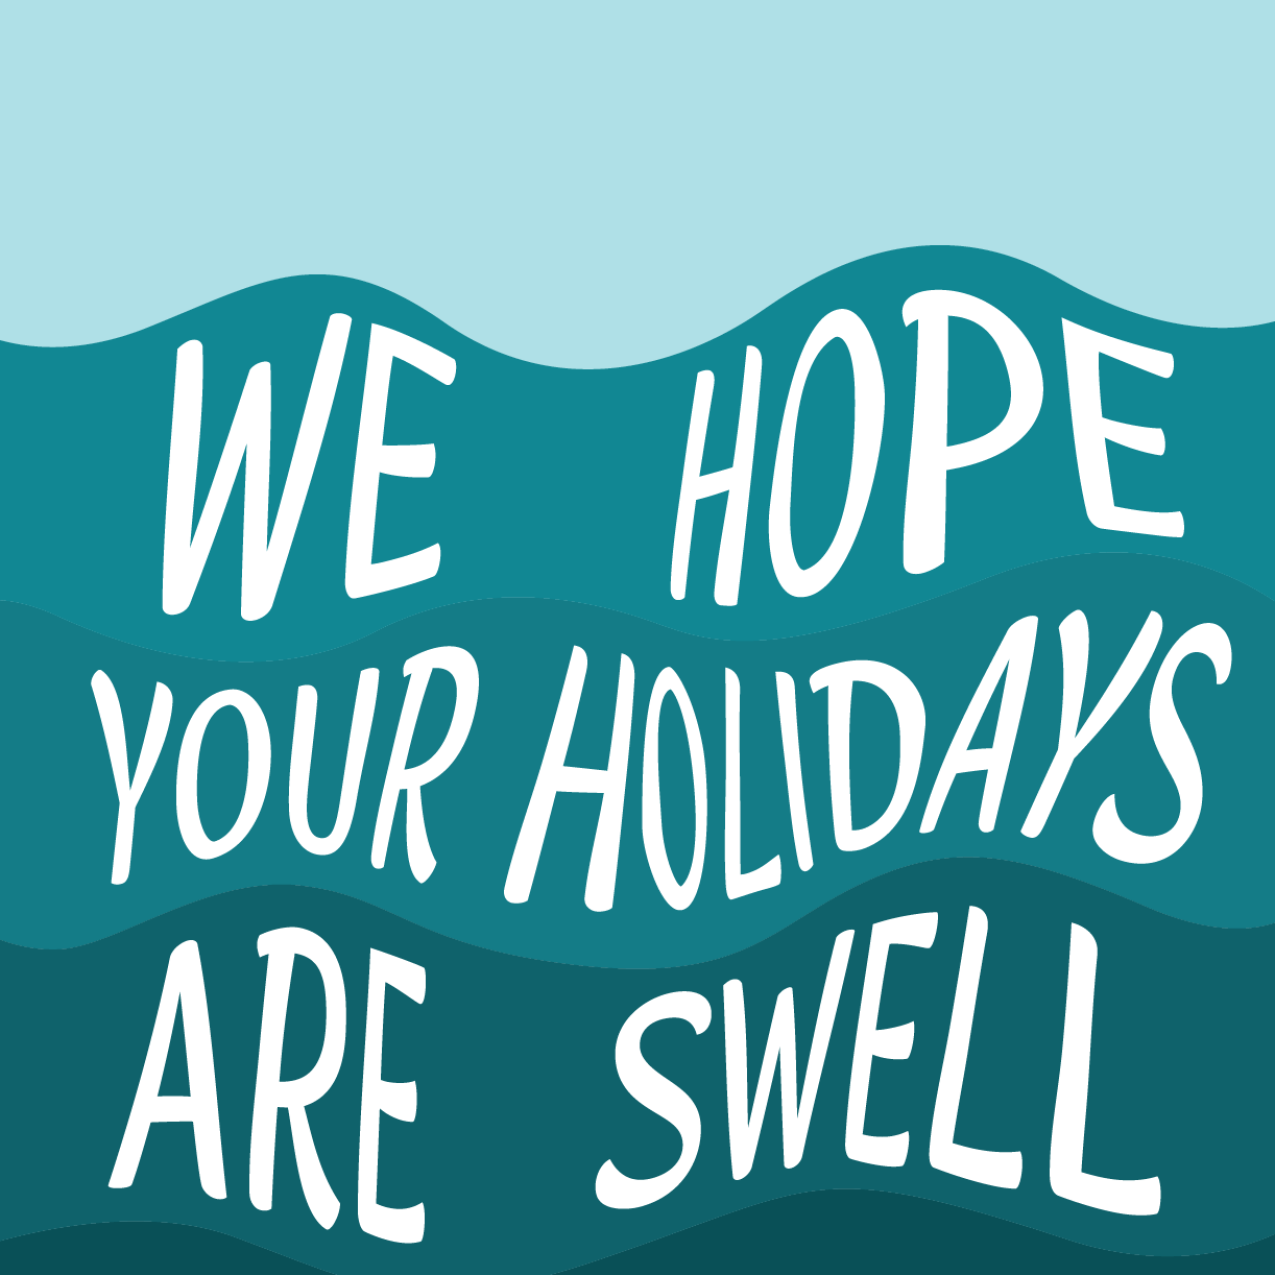 An illustrated holiday card featuring waves in the sea and a NOAA logo in the corner of the card. Text: We hope your holidays are swell! noaa.gov/education